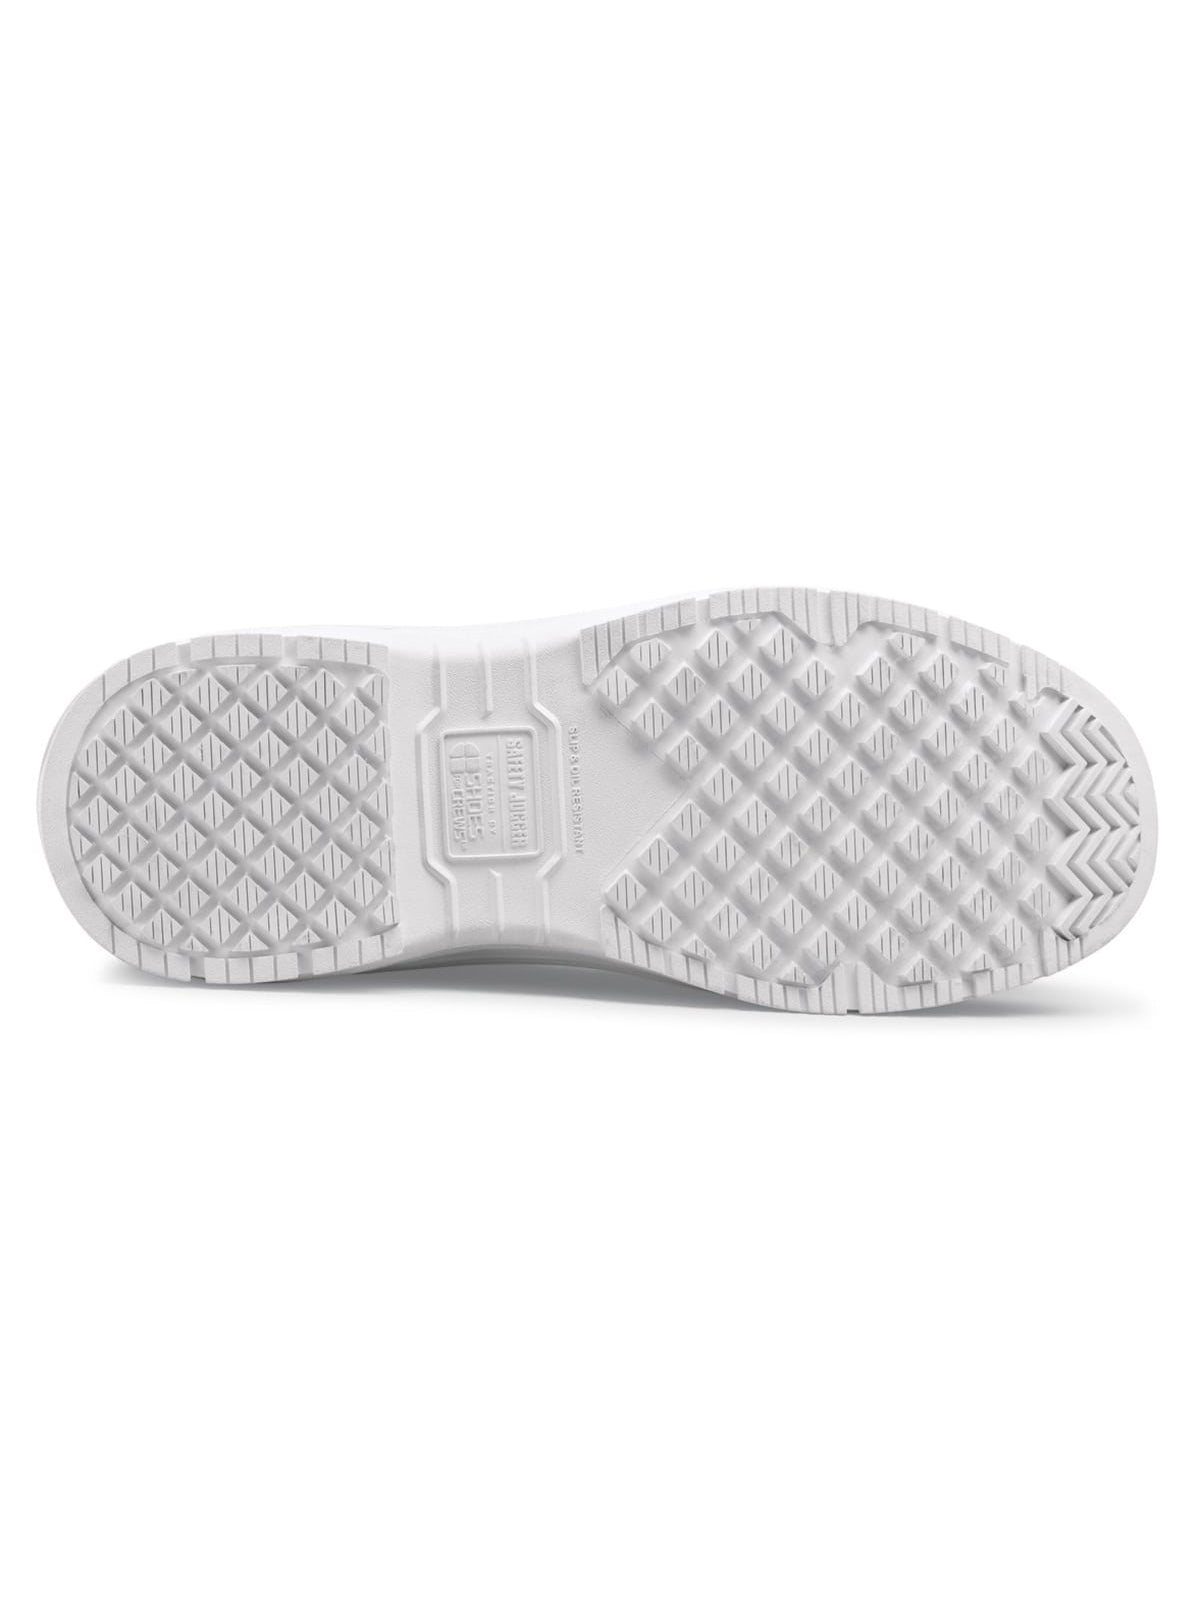 Unisex Work Shoe Gusto81 White (S3) by  Safety Jogger.